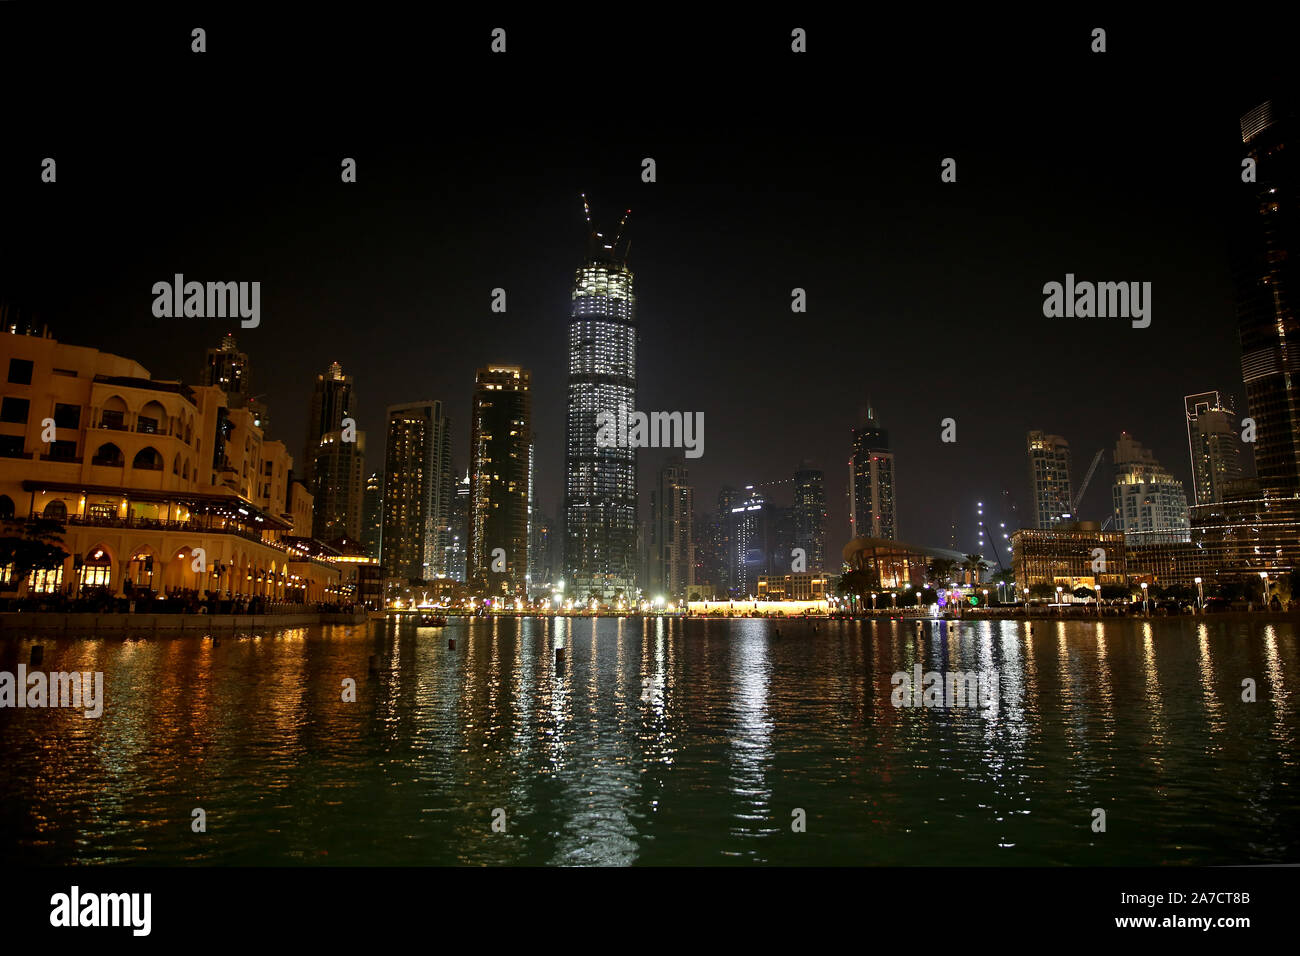 Downtown in the city at night with all the skyscrappers illluminated and reflecting in the lake, Dubai, United Arab Emirates. Stock Photo